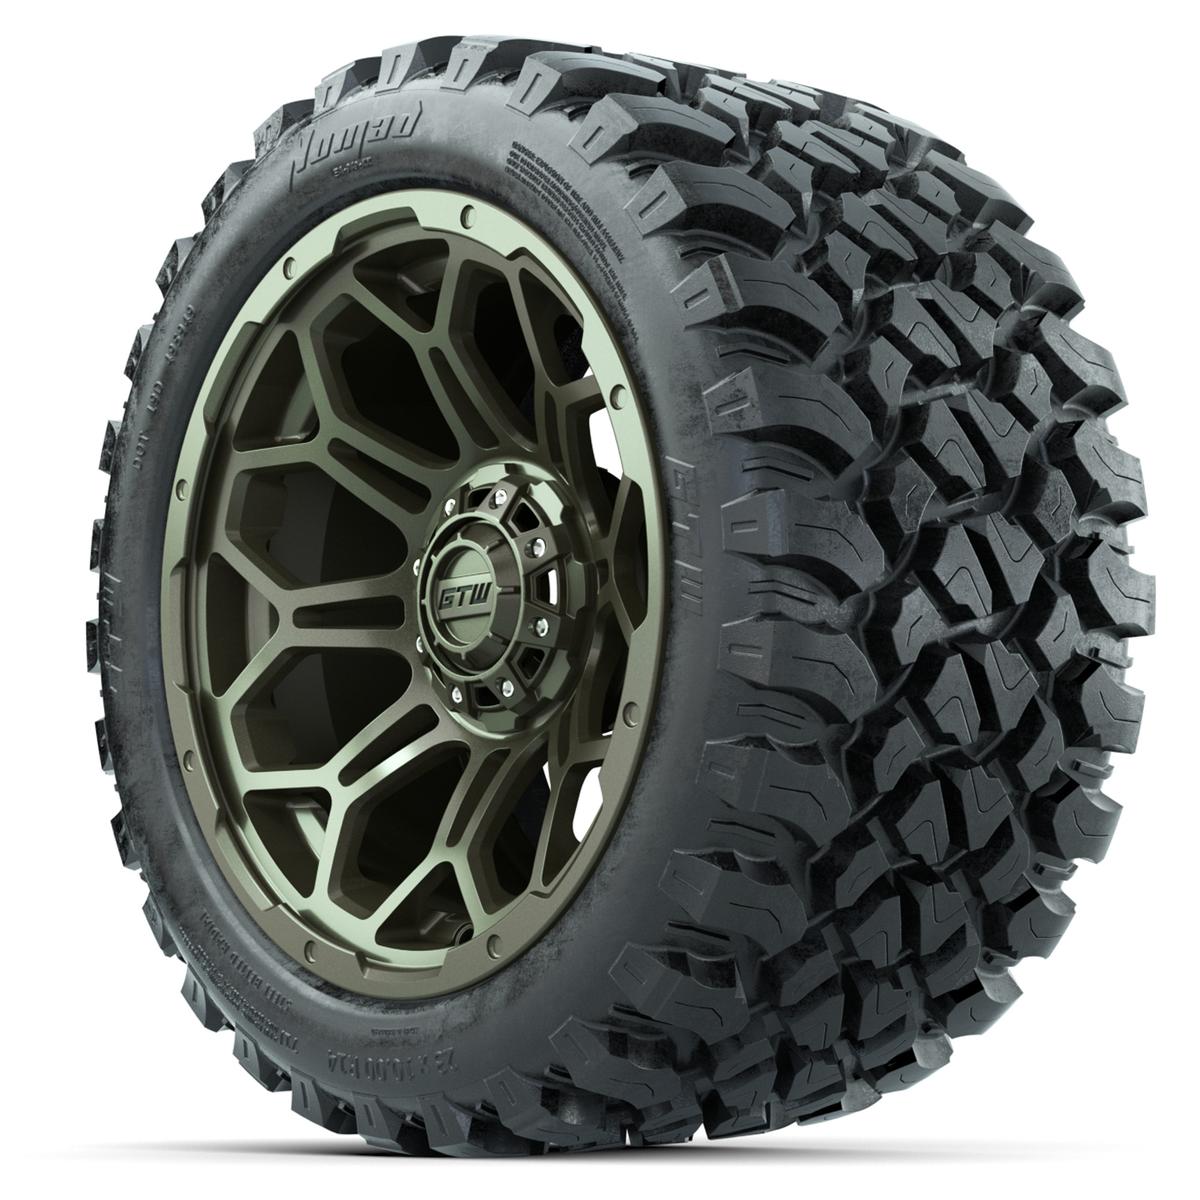 Set of (4) 14 in GTW Bravo Wheels with 23x10-14 GTW Nomad All-Terrain Tires